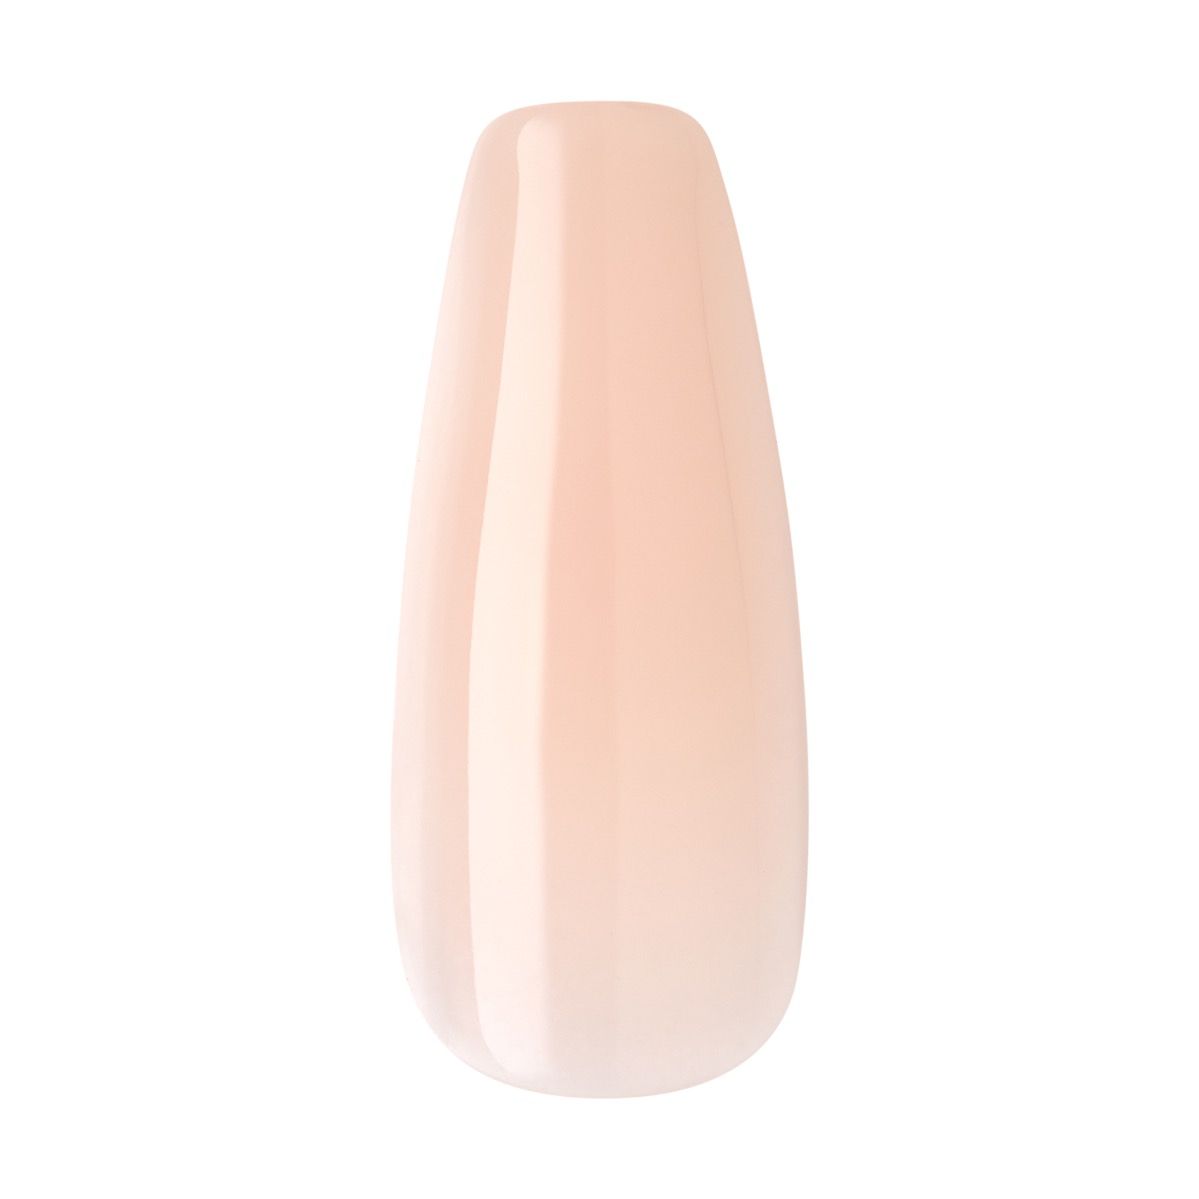 KISS BARE-BUT-BETTER NAILS - NUDE DRAMA BN02